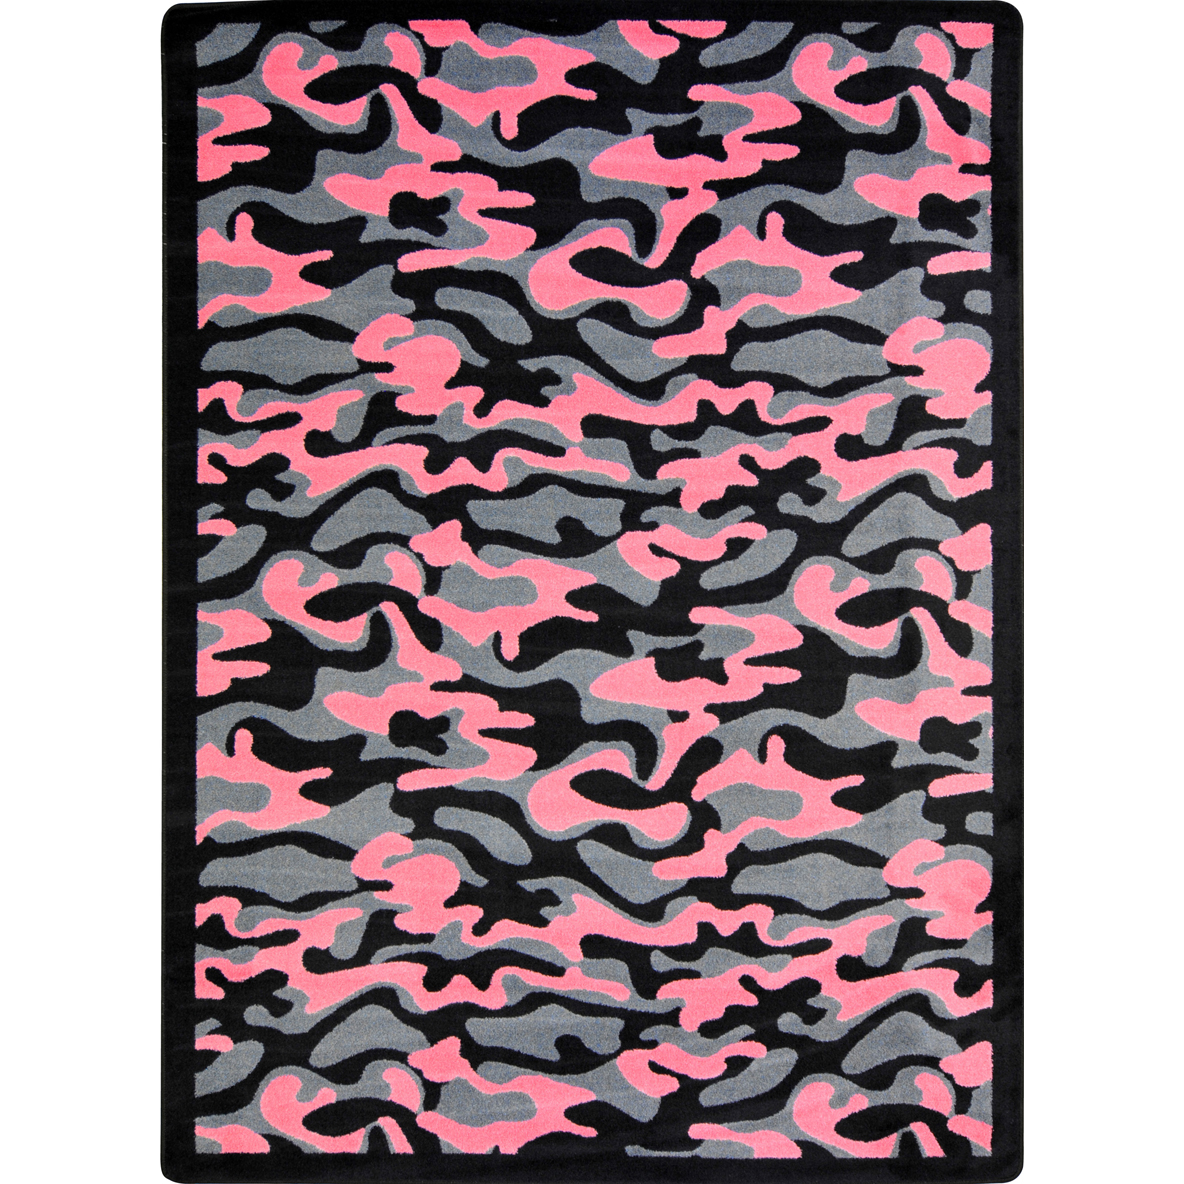 46-Inch by 64-Inch by 0.36-Inch Joy Carpets Kaleidoscope Funky Camo Whimsical Area Rugs Dark Army 